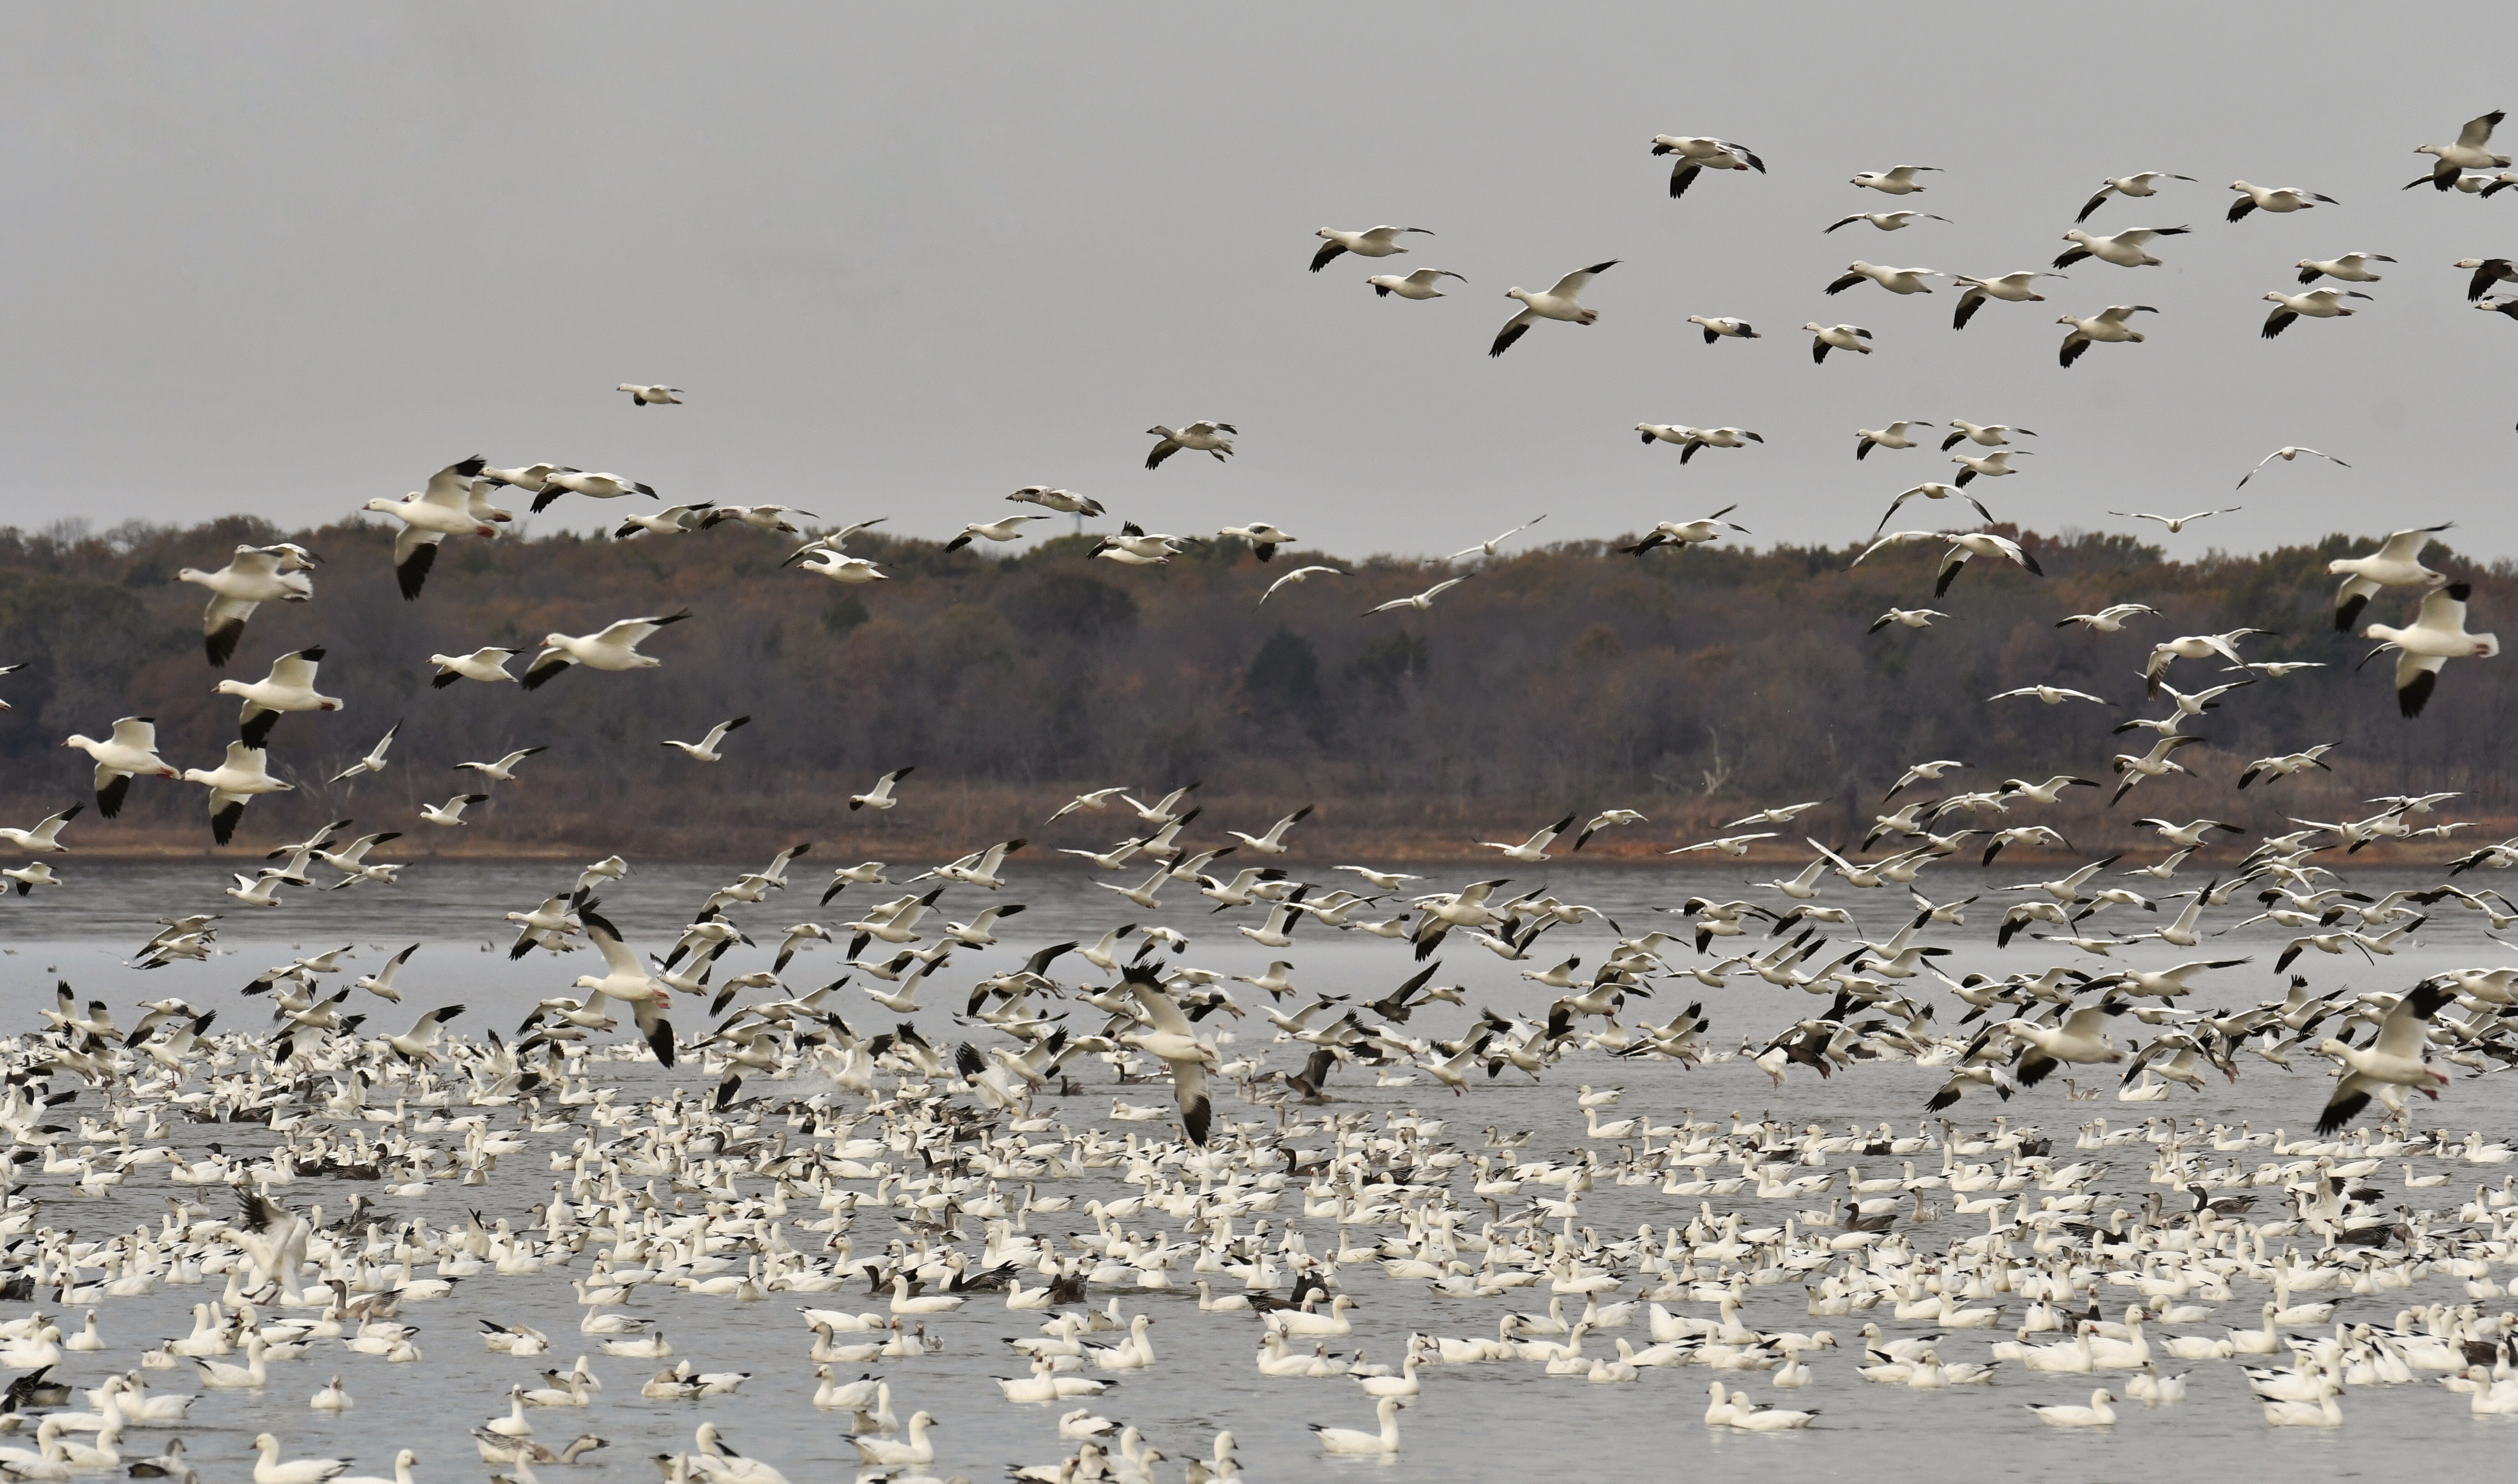 A photograph of a large flock of geese, which are white with black-tipped wings and orange beaks. Most are sitting in a body of water, while others have taken flight.